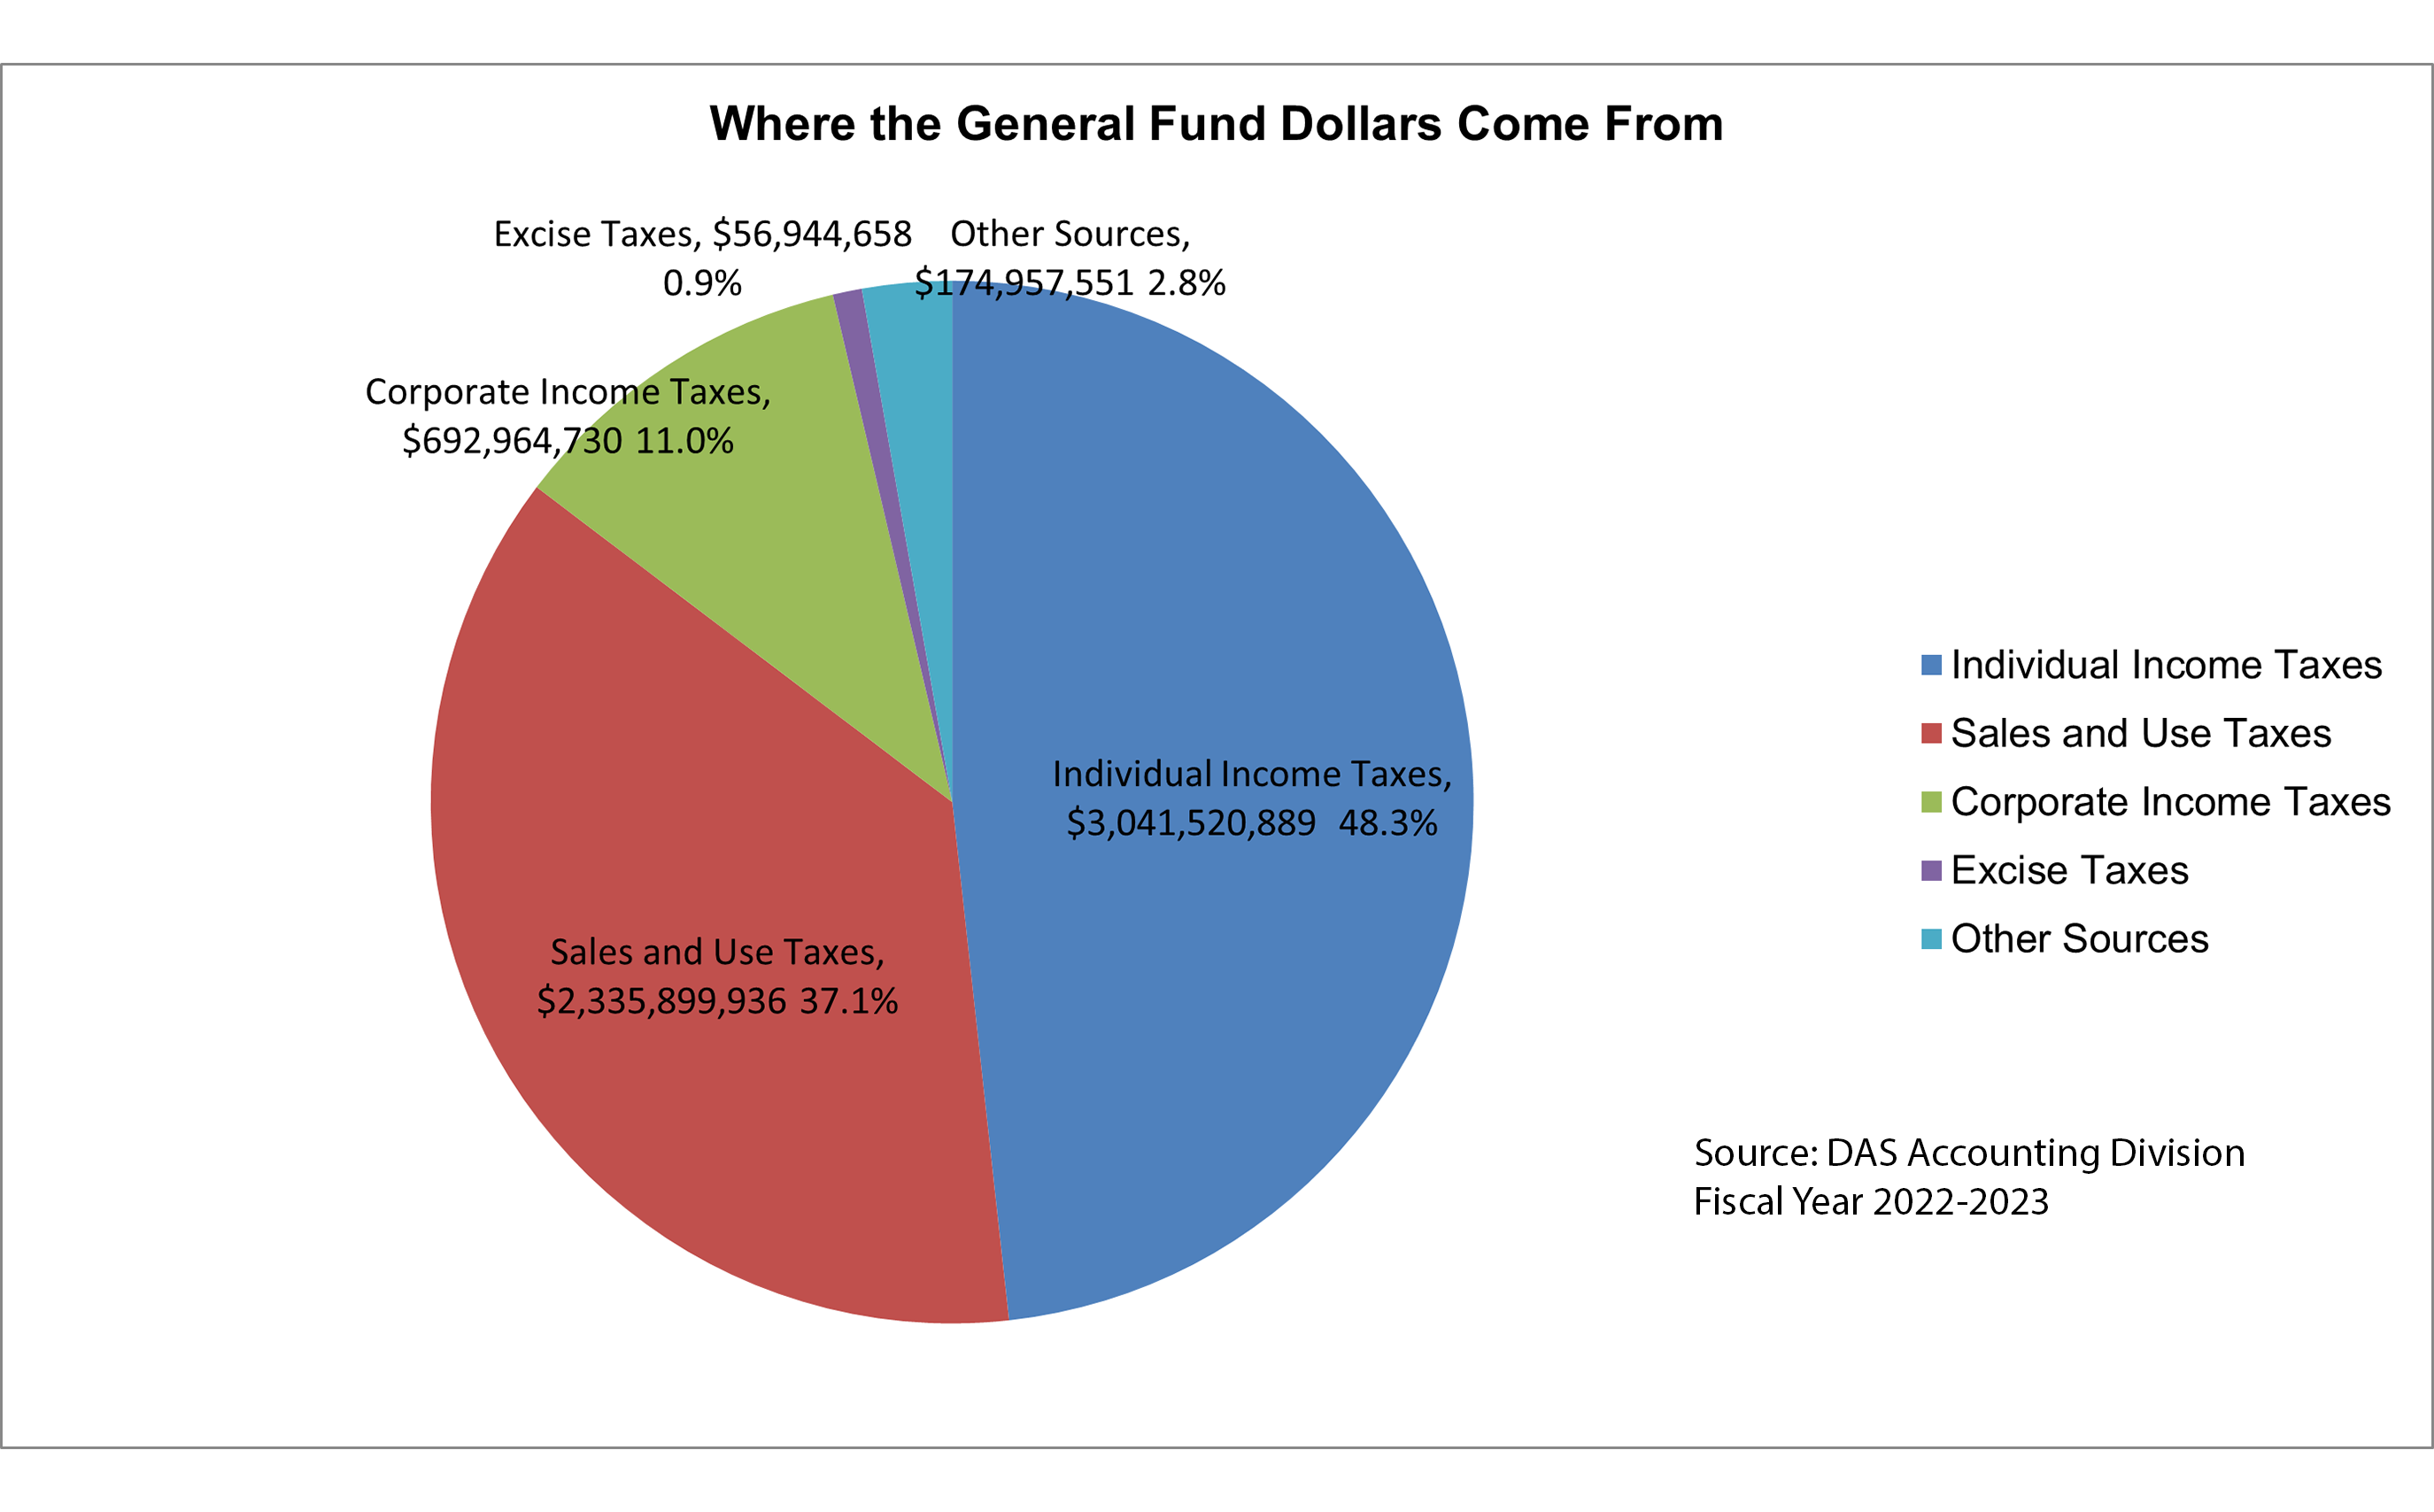  Pie Chart detailing where General Fund Dollars Come From